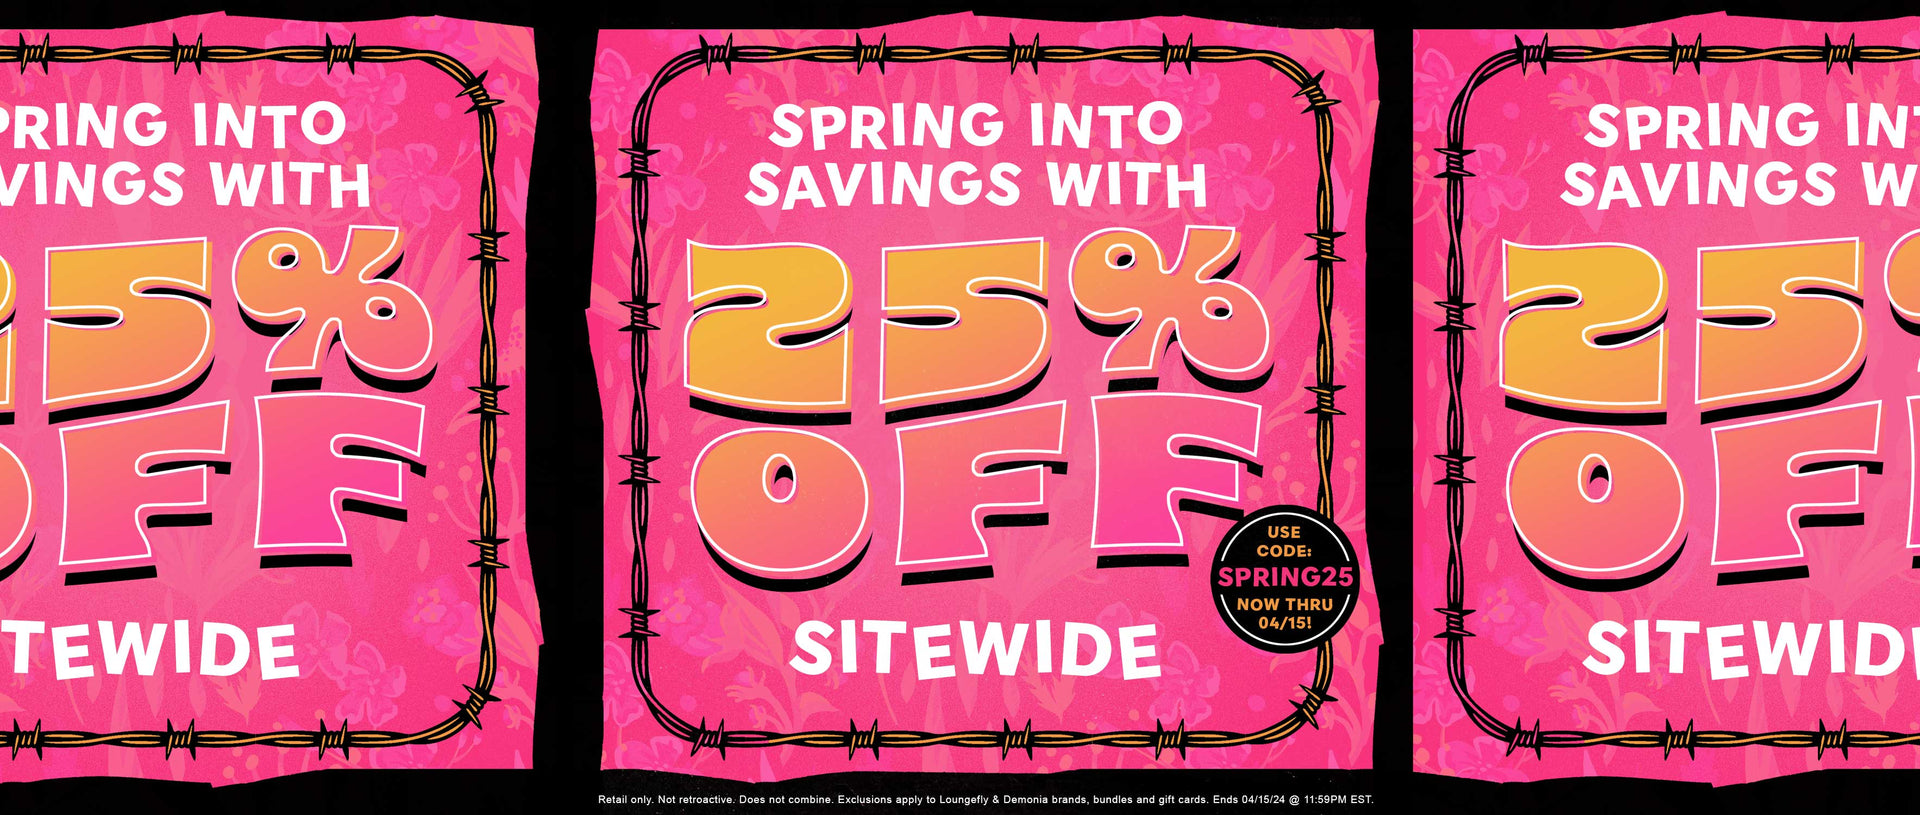 Use code SPRING25 for 25% Off Sitewide!